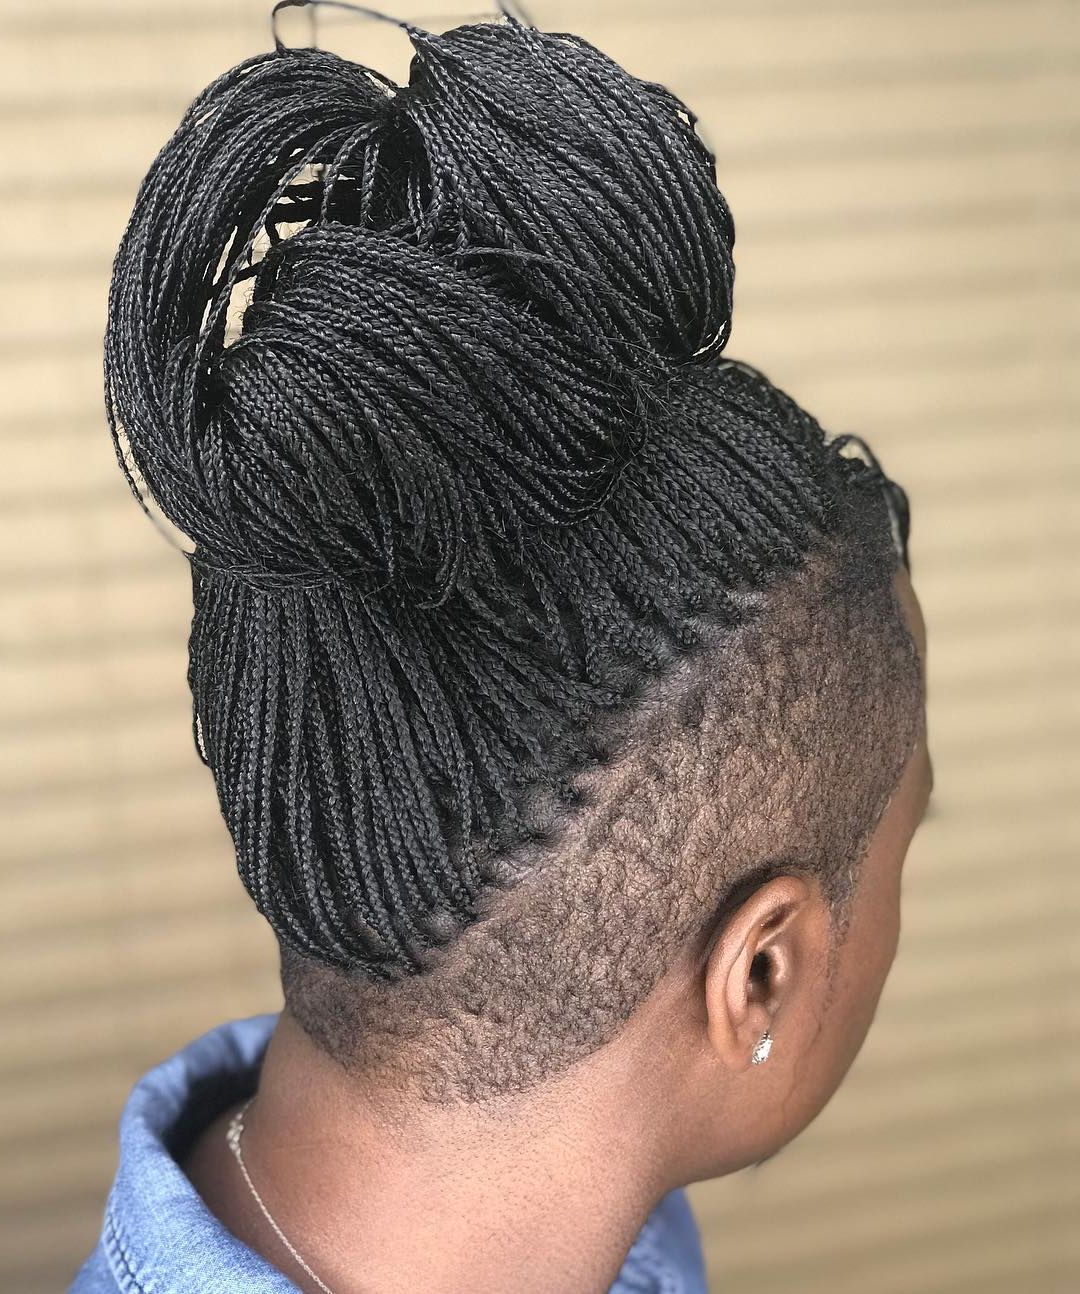 20 Superb Braids With Shaved Sides Worth Copying Inside Widely Used Blonde Ponytail Hairstyles With Yarn (View 13 of 20)